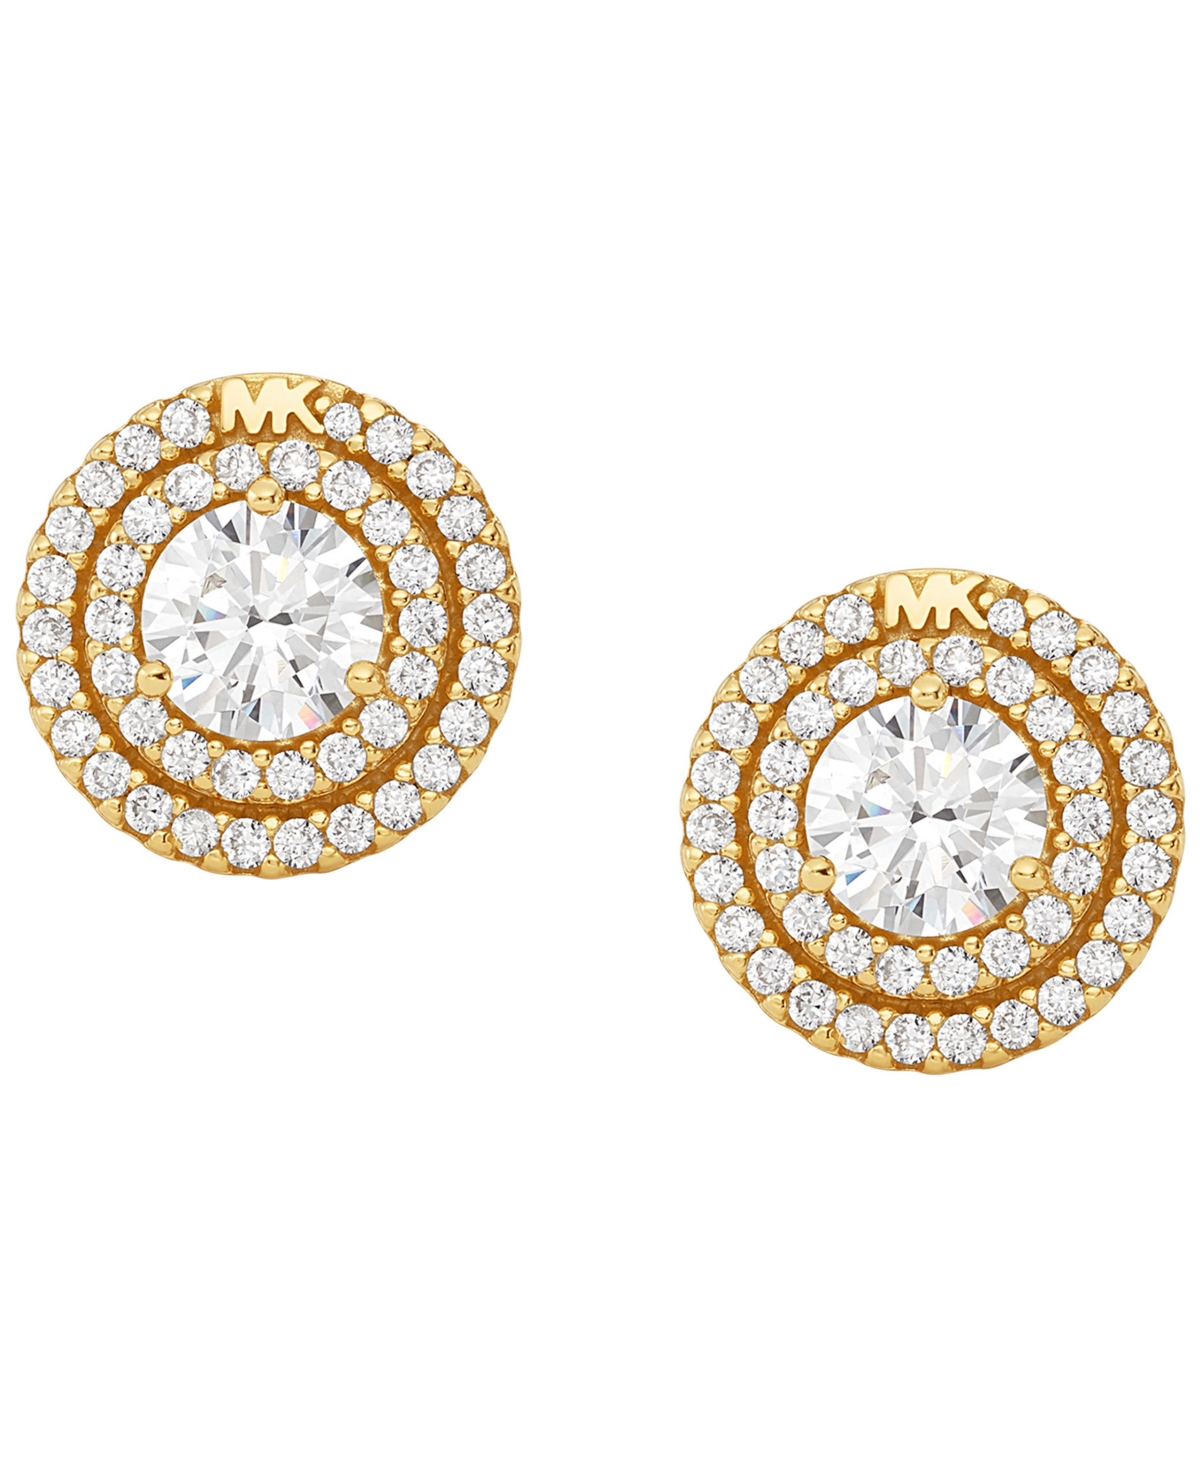 Michael Kors Sterling Silver Pave Halo Stud Earrings In Gold Plating